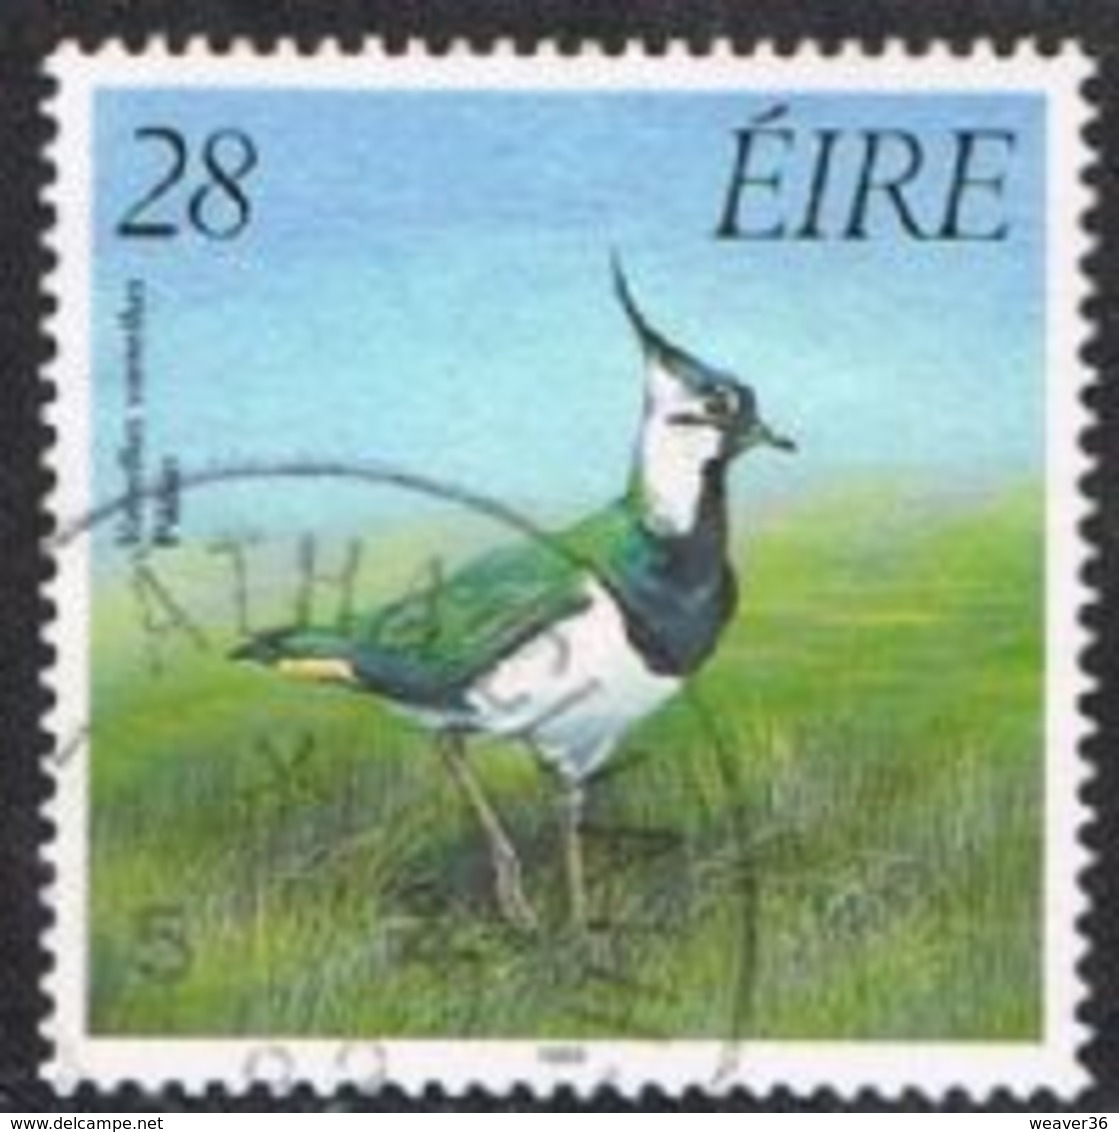 Ireland SG734 1989 Game Birds 28p Fine Used [15/14693/4D] - Used Stamps